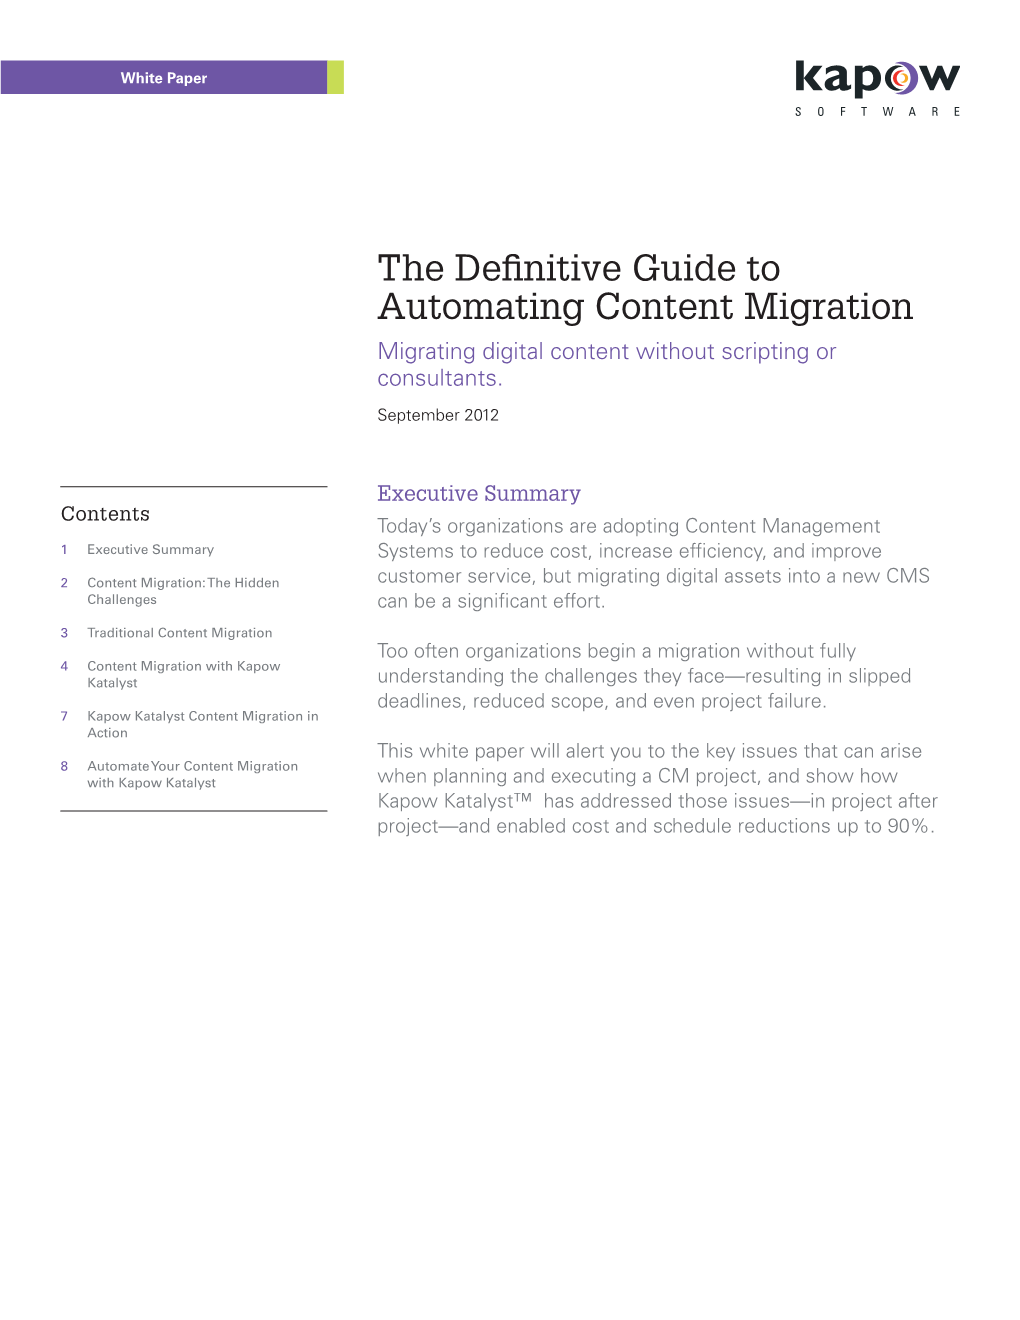 The Definitive Guide to Automating Content Migration Migrating Digital Content Without Scripting Or Consultants